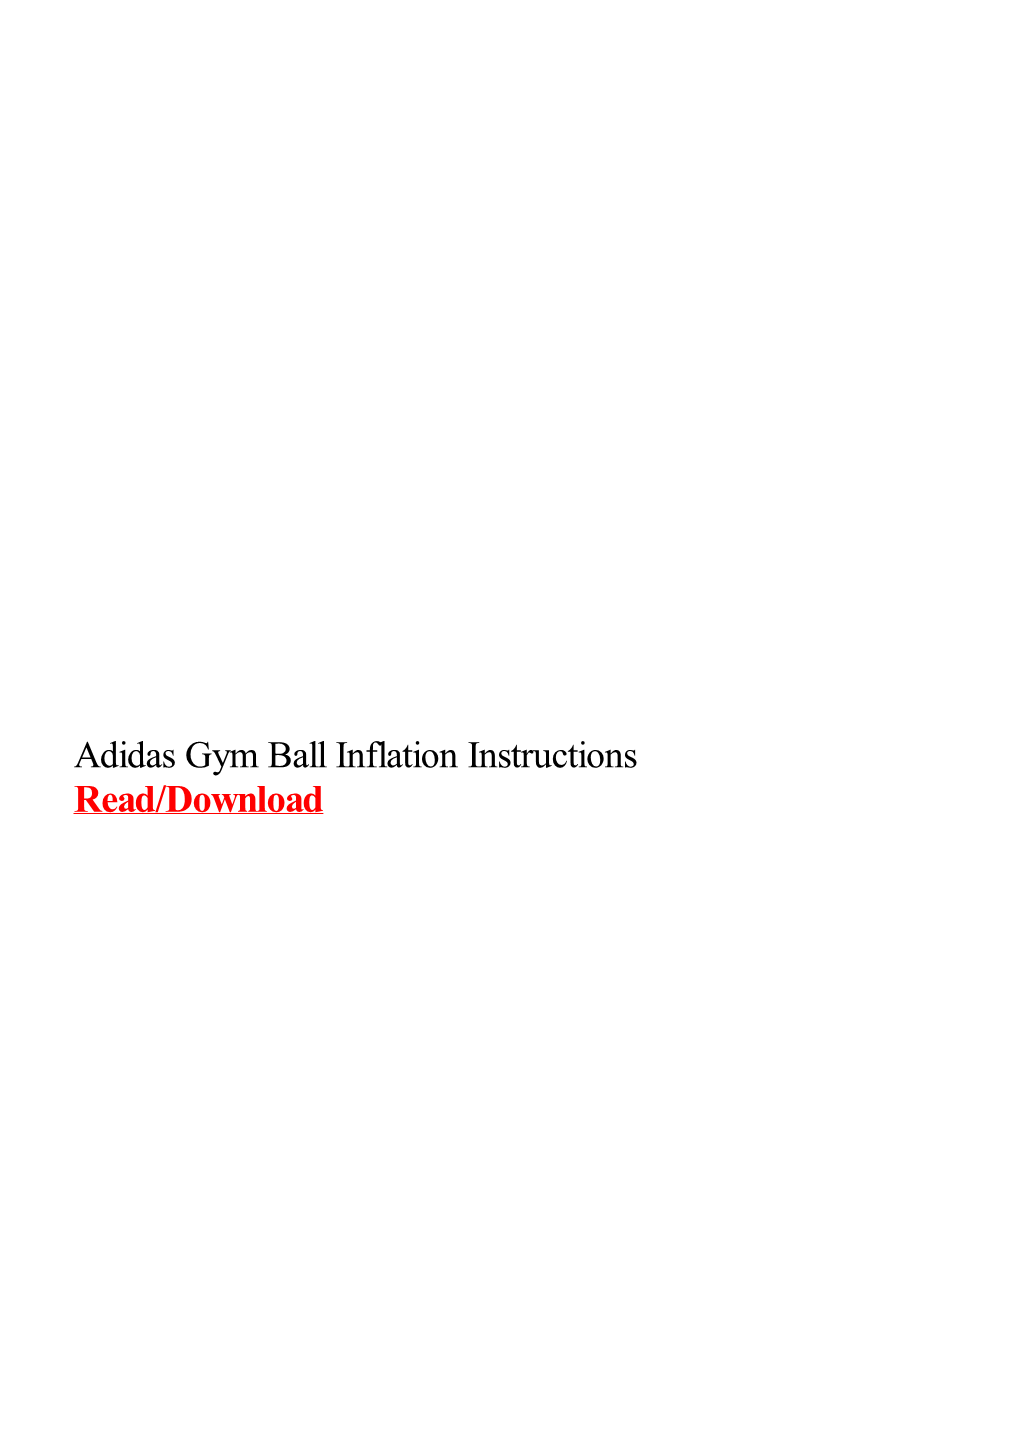 Adidas Gym Ball Inflation Instructions